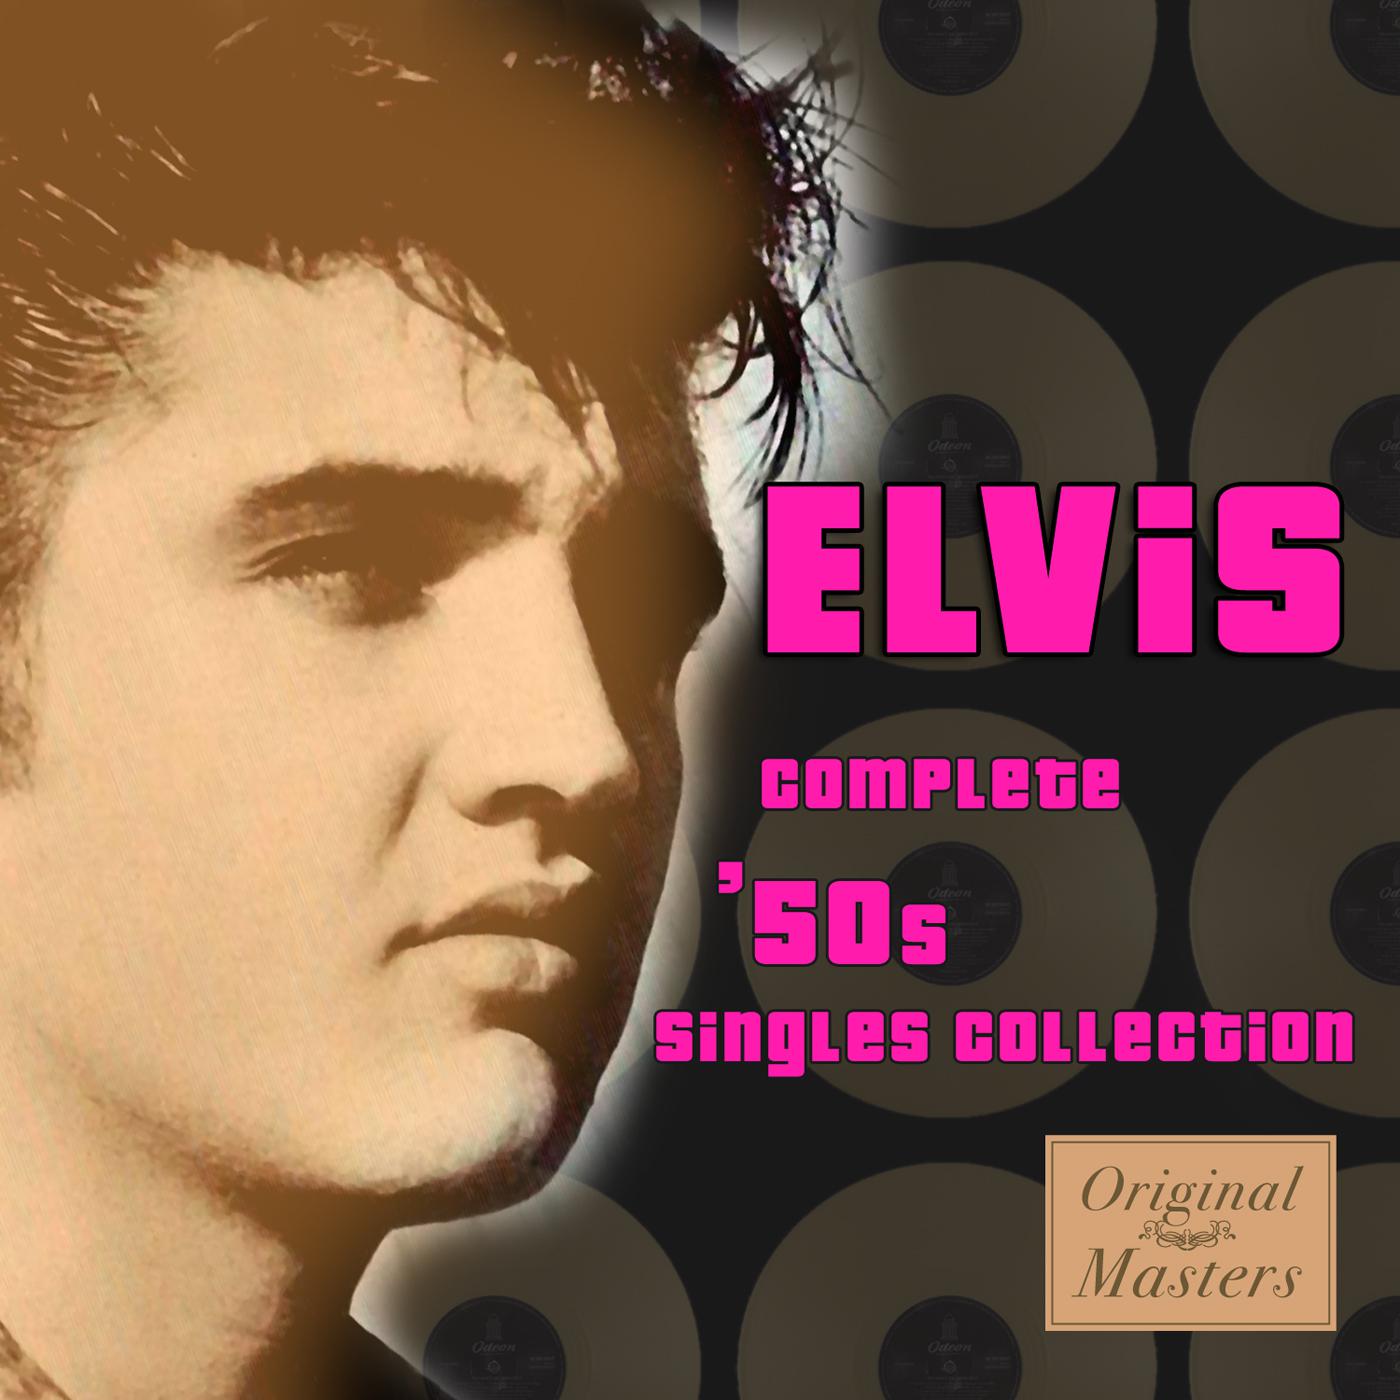 The Complete 50s Singles Collection